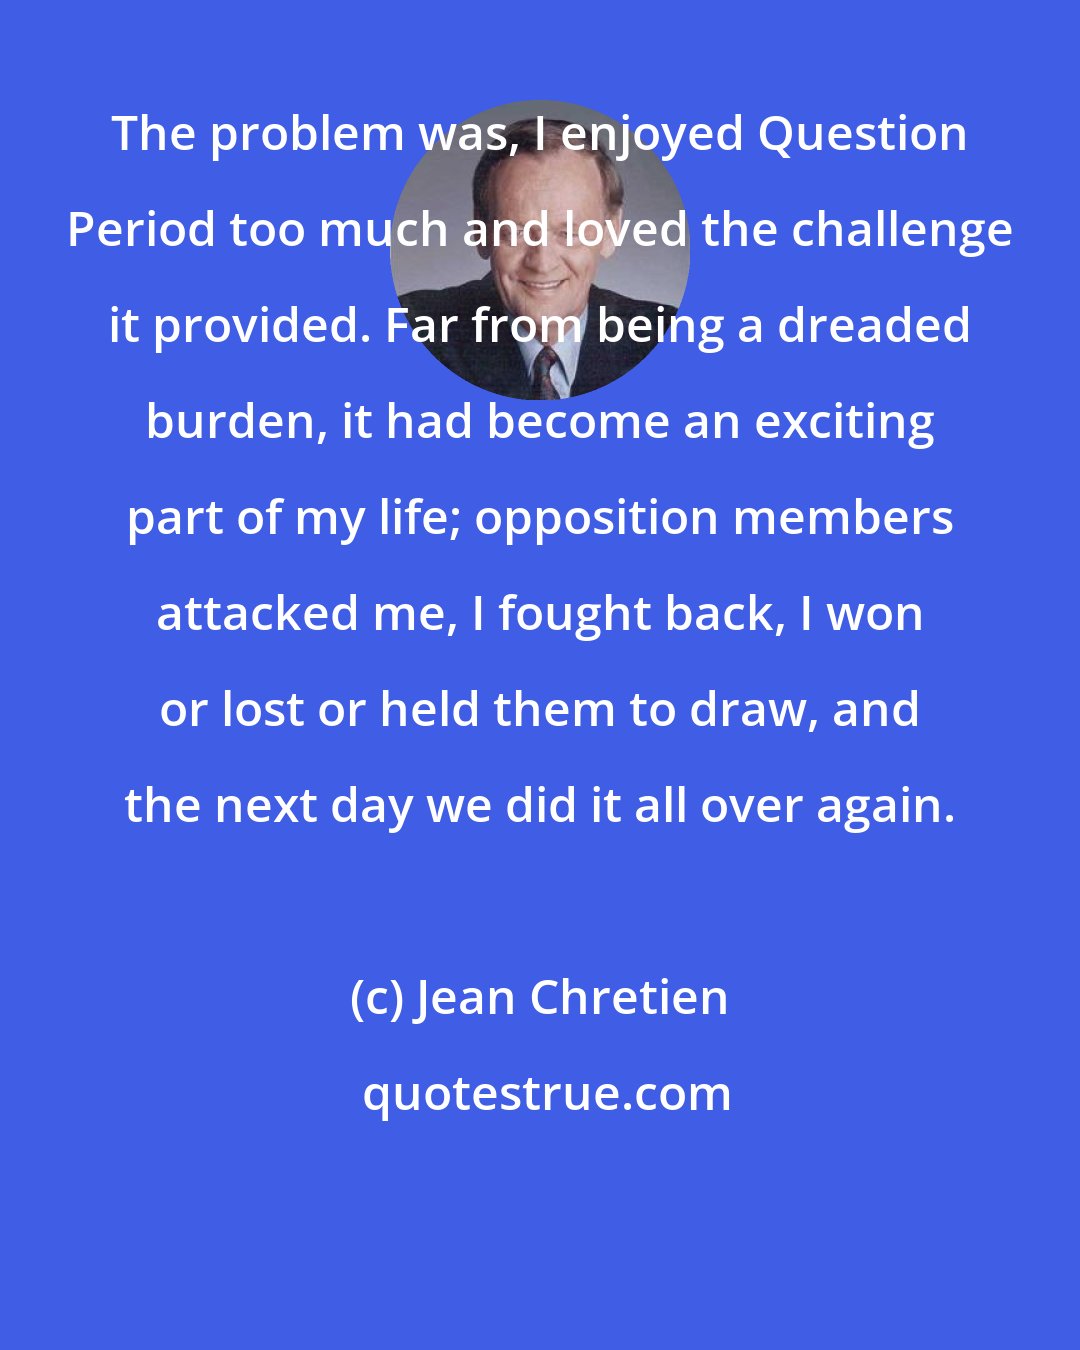 Jean Chretien: The problem was, I enjoyed Question Period too much and loved the challenge it provided. Far from being a dreaded burden, it had become an exciting part of my life; opposition members attacked me, I fought back, I won or lost or held them to draw, and the next day we did it all over again.